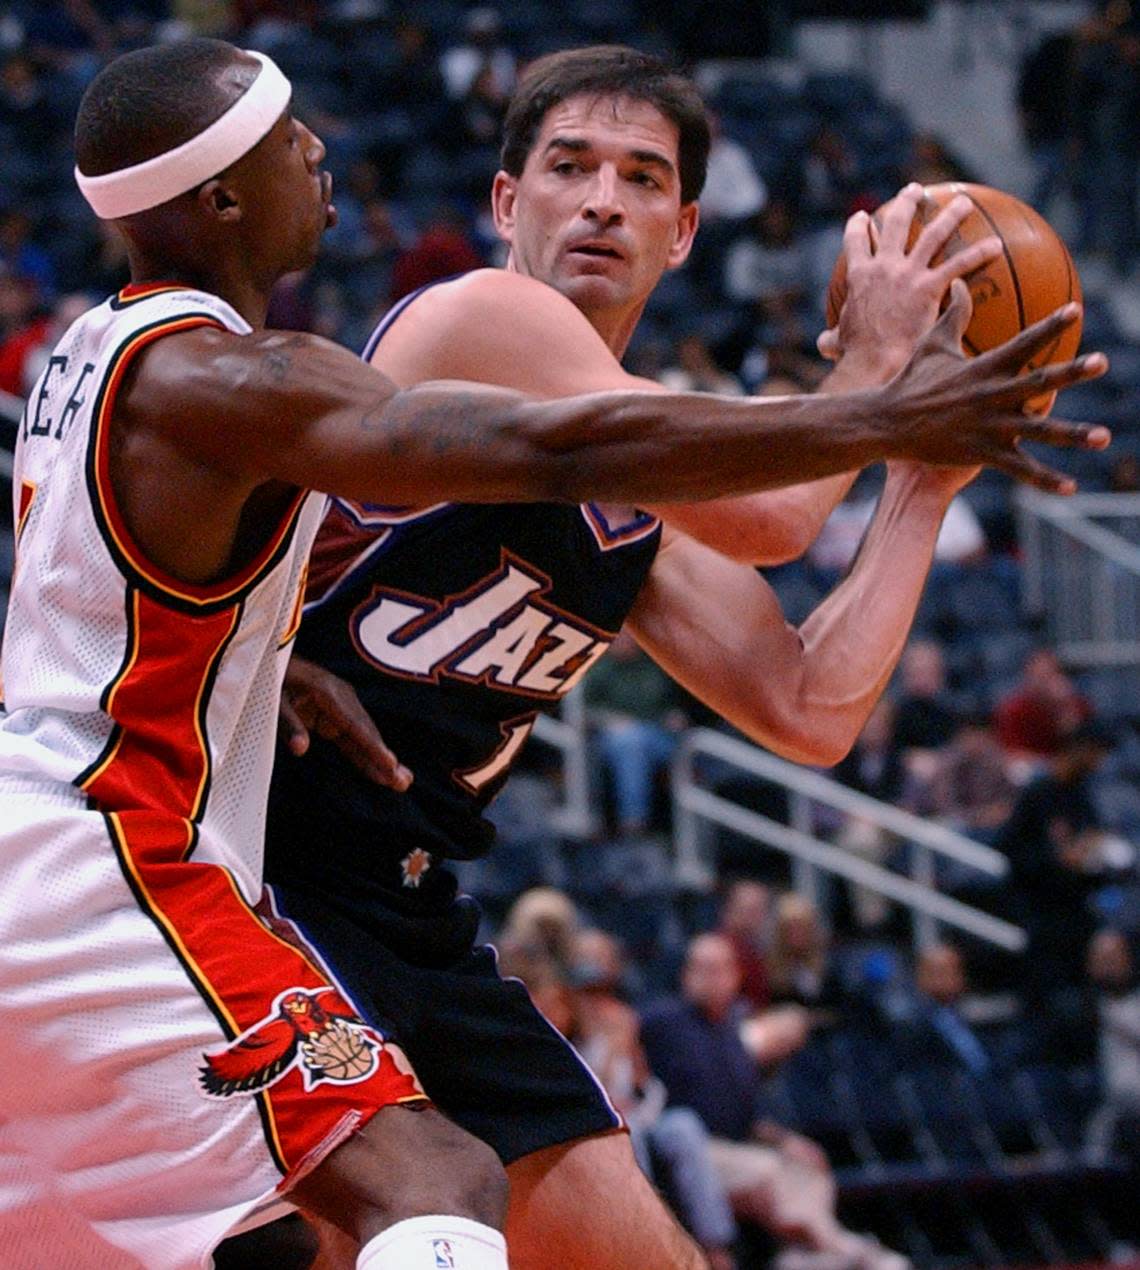 Utah Jazz’s John Stockton (12) , right, looks for a teammate under pressure from Atlanta Hawks’ Jason Terry (31) during first quarter action, Thursday, Oct. 31, 2002, at Philips Arena in Atlanta. McClatchy file